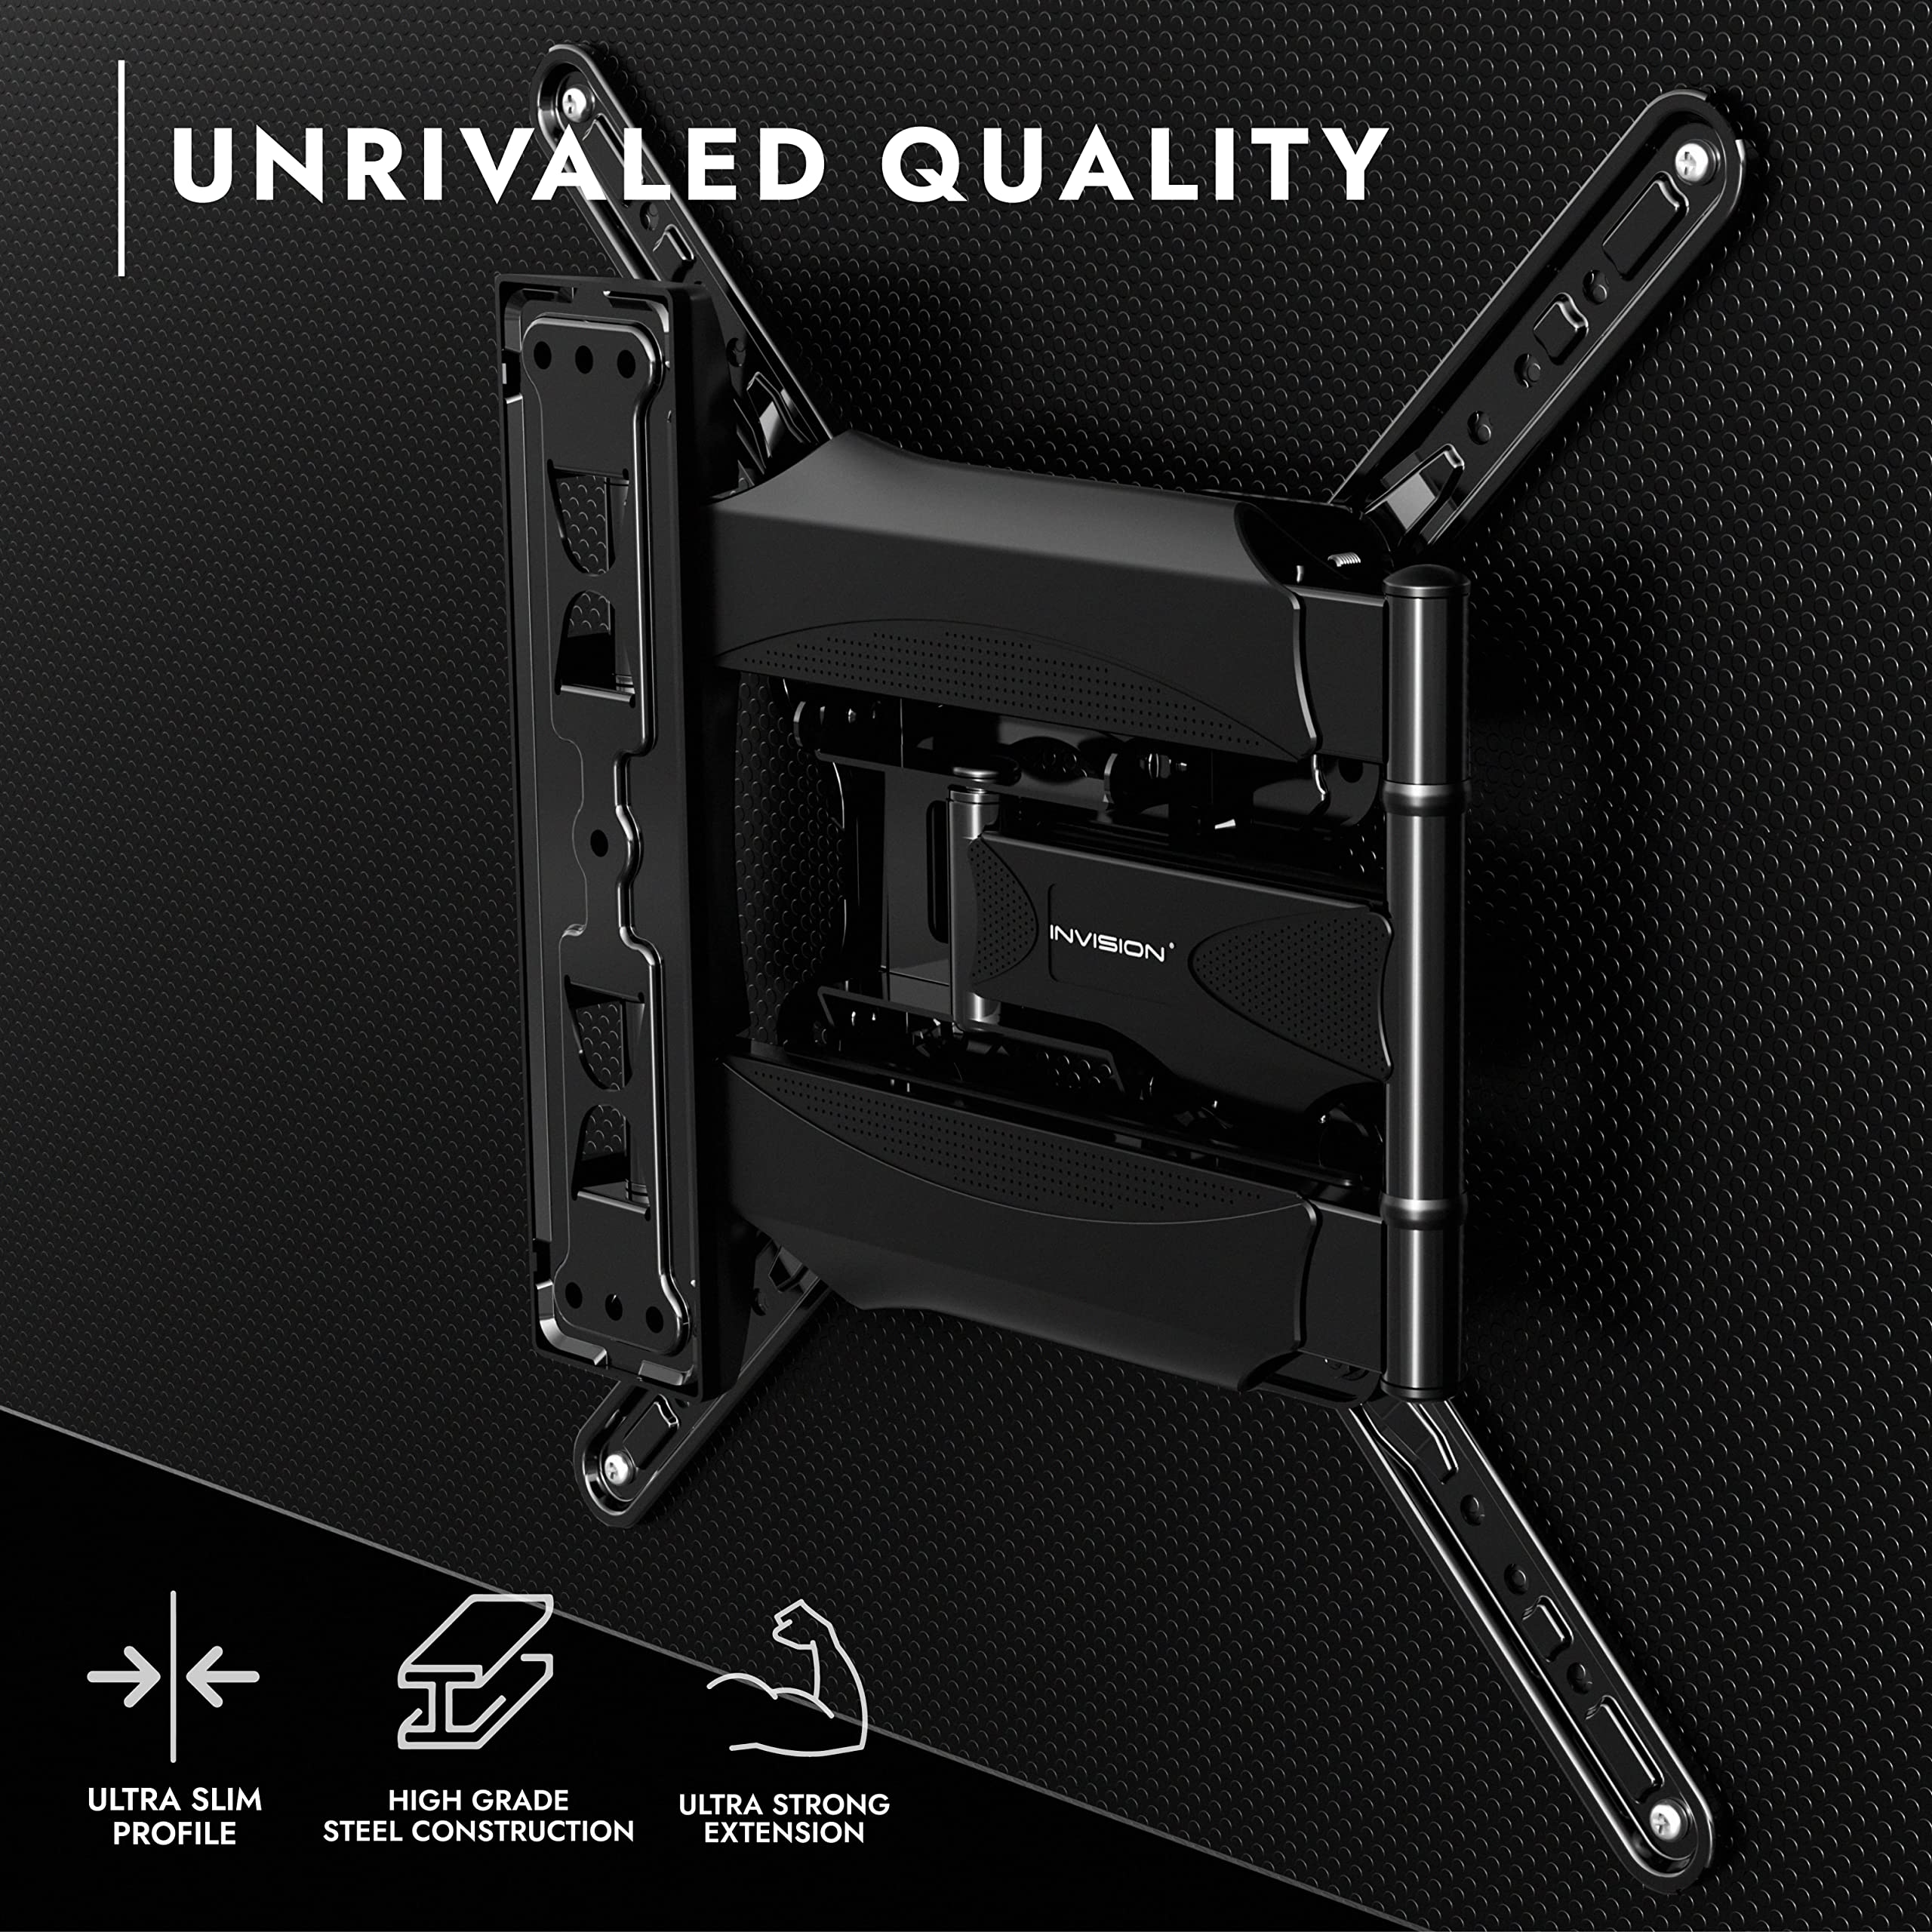 Invision TV Wall Bracket Mount for 24-55 Inch Screens, VESA 100x100mm up to 400x400mm, Tilts Swivels & Extends for Flat & Curved TVs, Includes Spirit Level, Weight Capacity 36.2kg (HDTV-E)